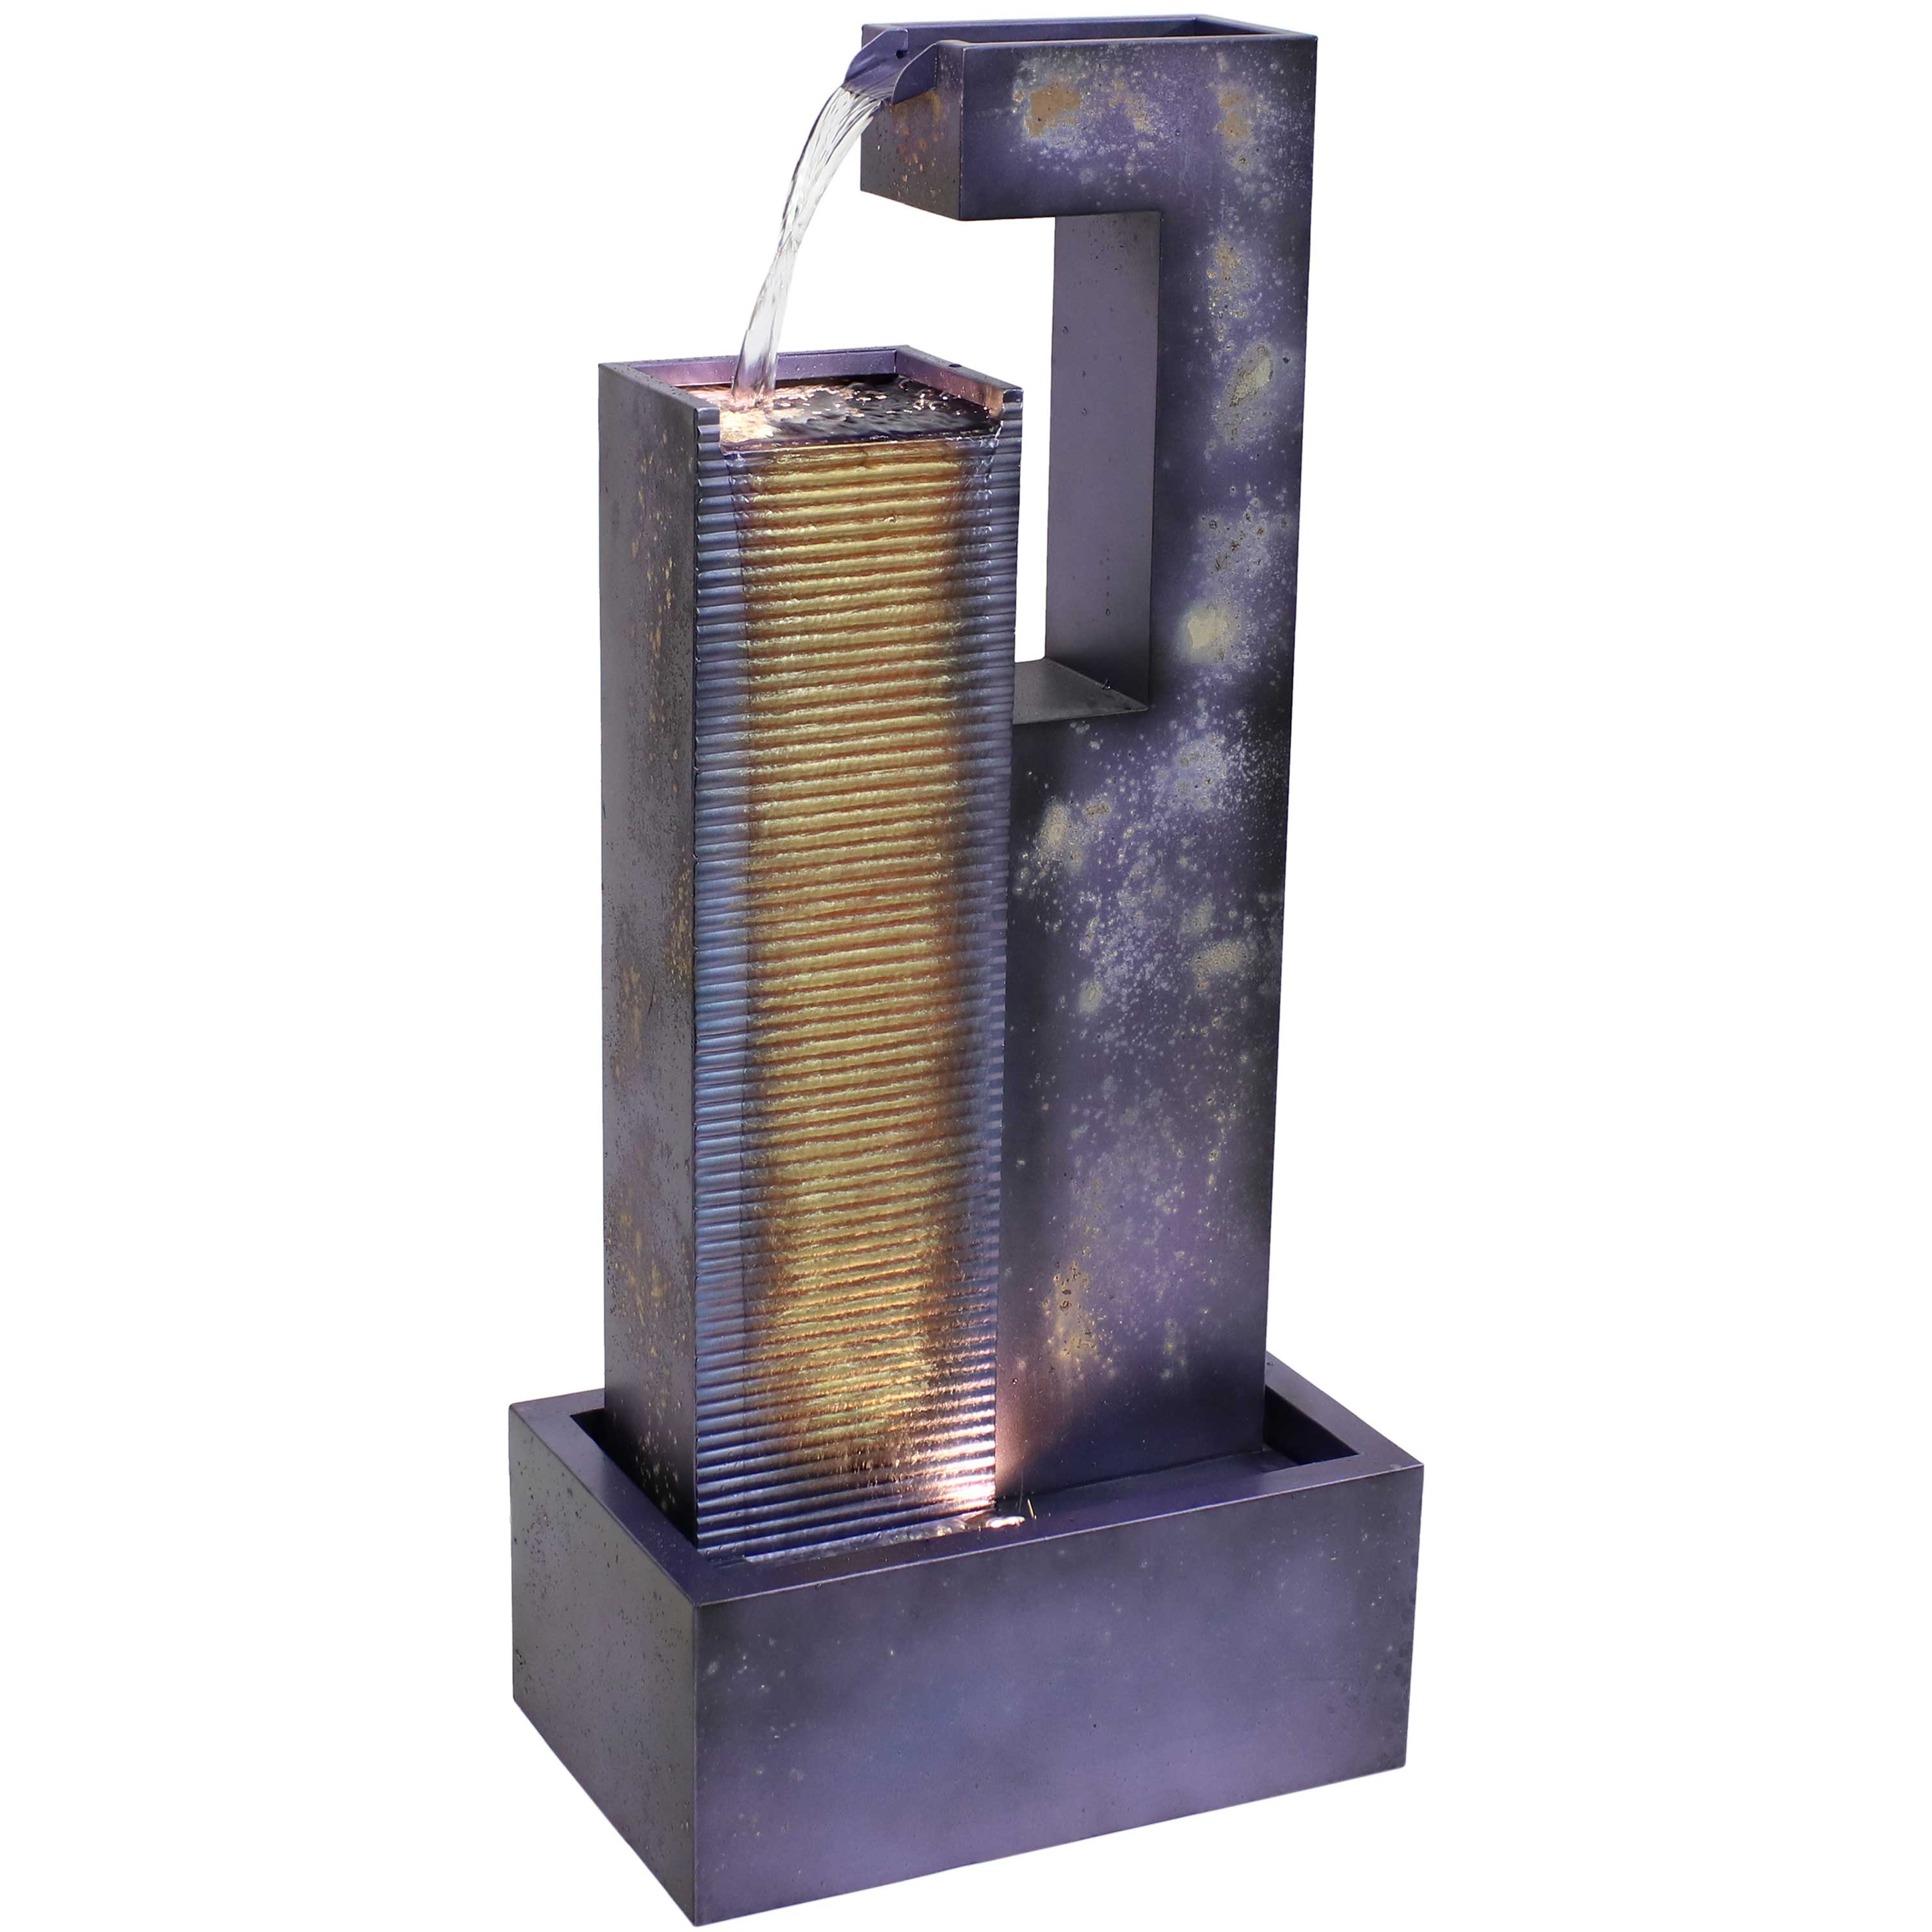 Sunnydaze Cascading Tower Metal Water Fountain with LED Lights - 32-Inch